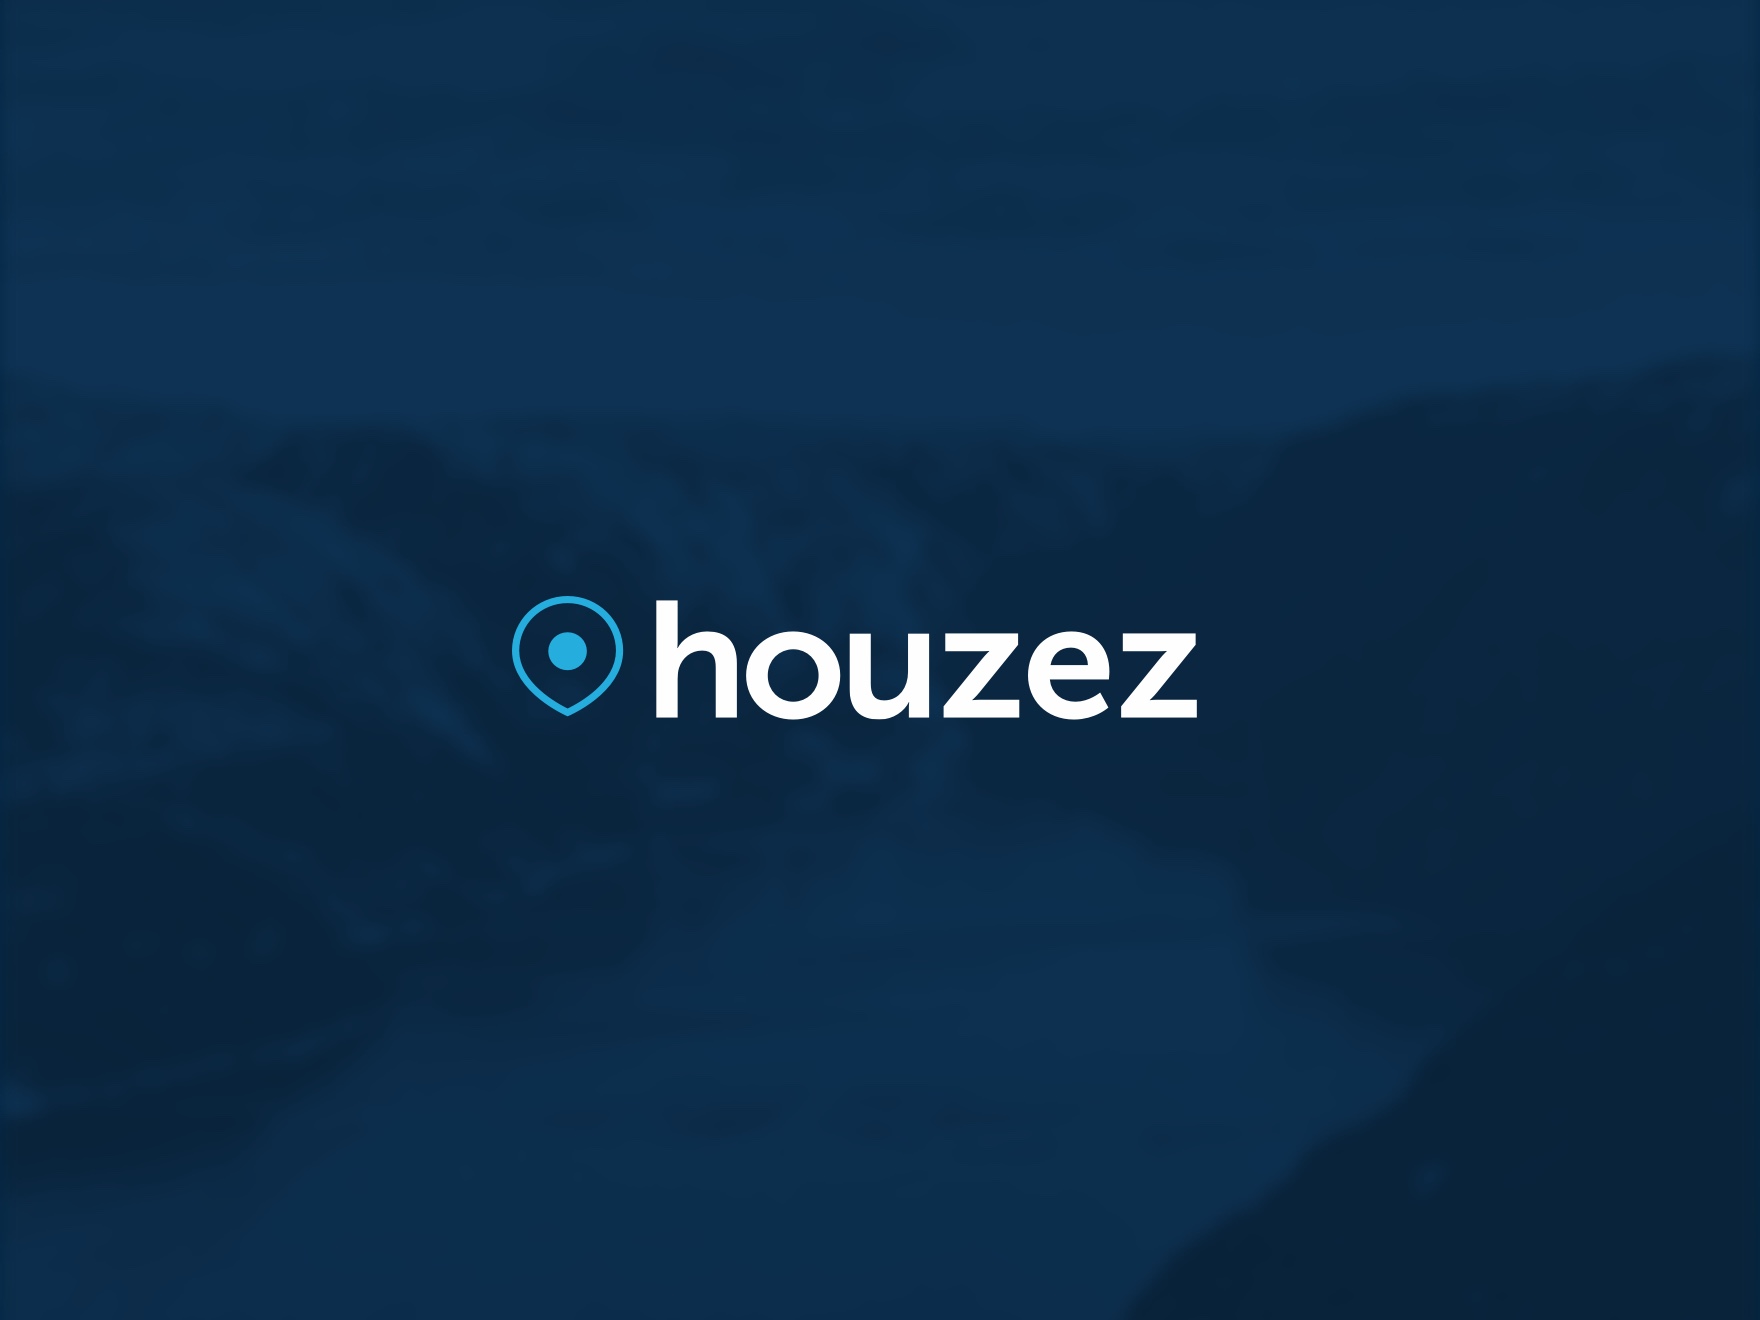 Why do you need the Houzez WordPress theme for your site